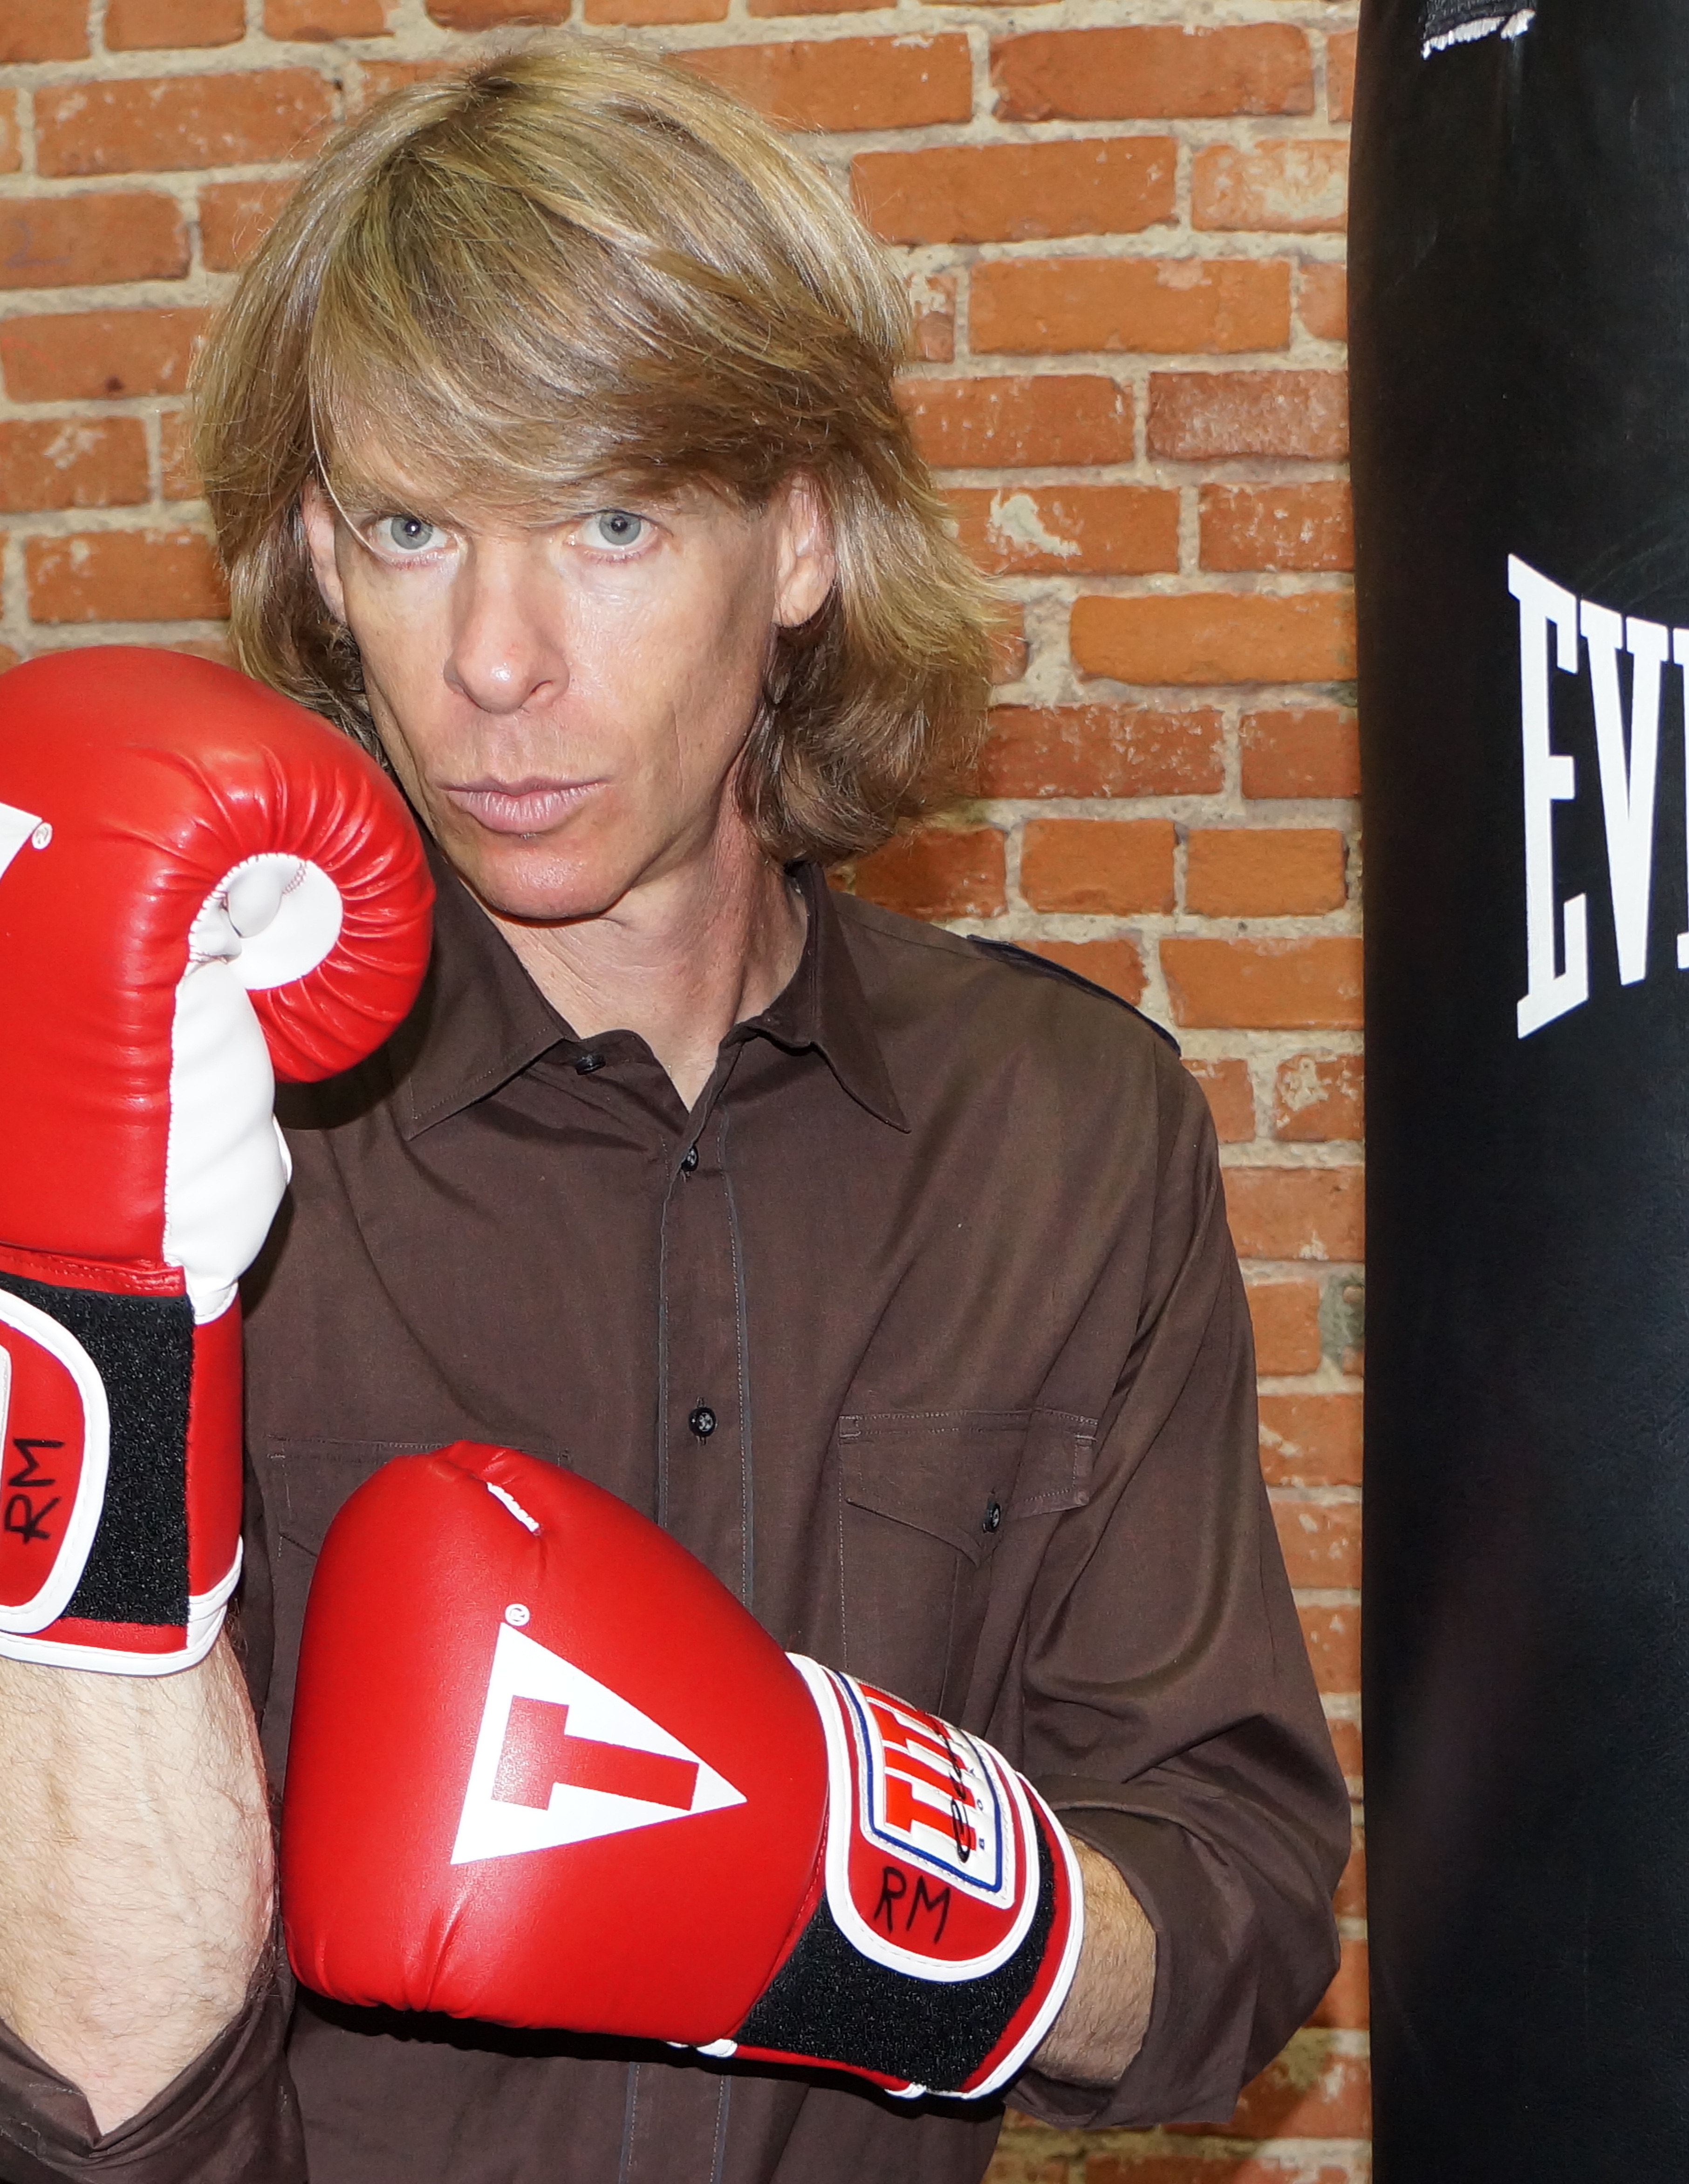 Gregory Graham at the Stables for Rock Steady Boxing NY/LA fighting back against Parkinson's on 12/7/14